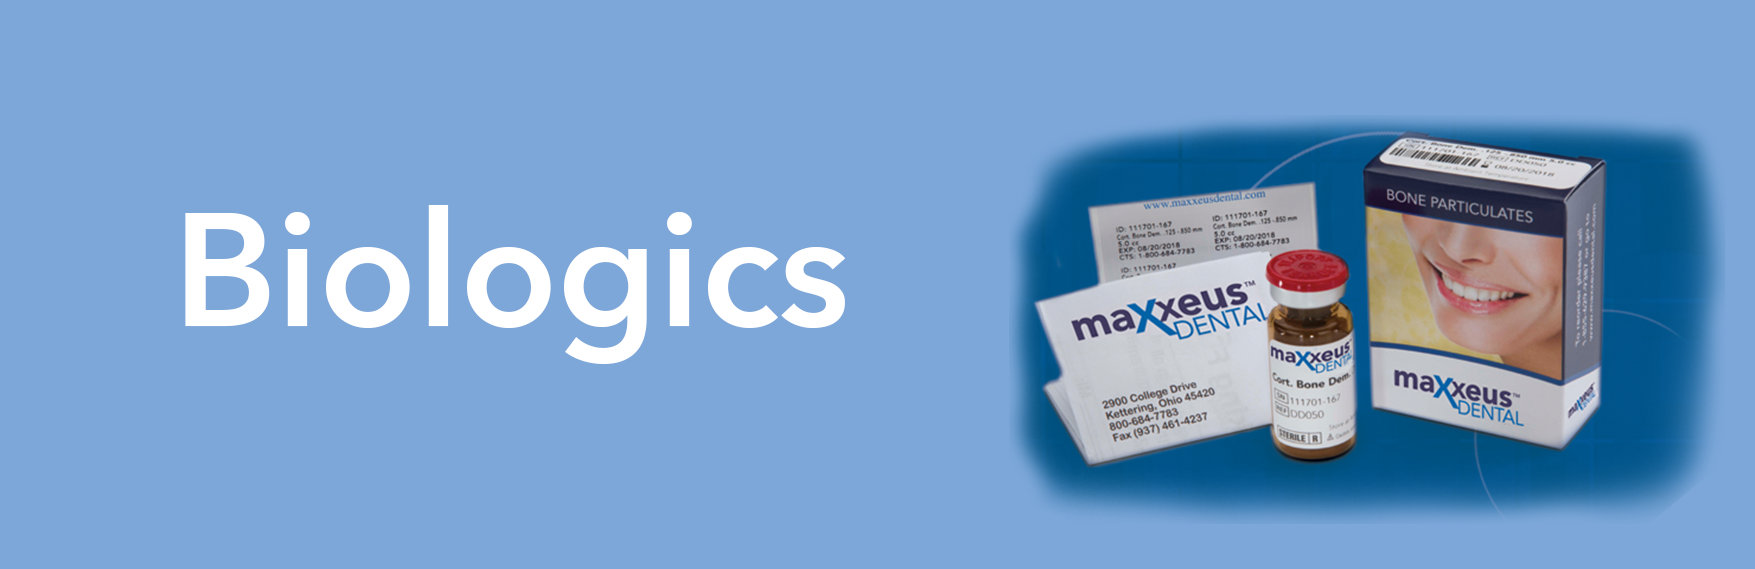 Maxxeus Dental biologics and allograft materials offered by Dental TI.